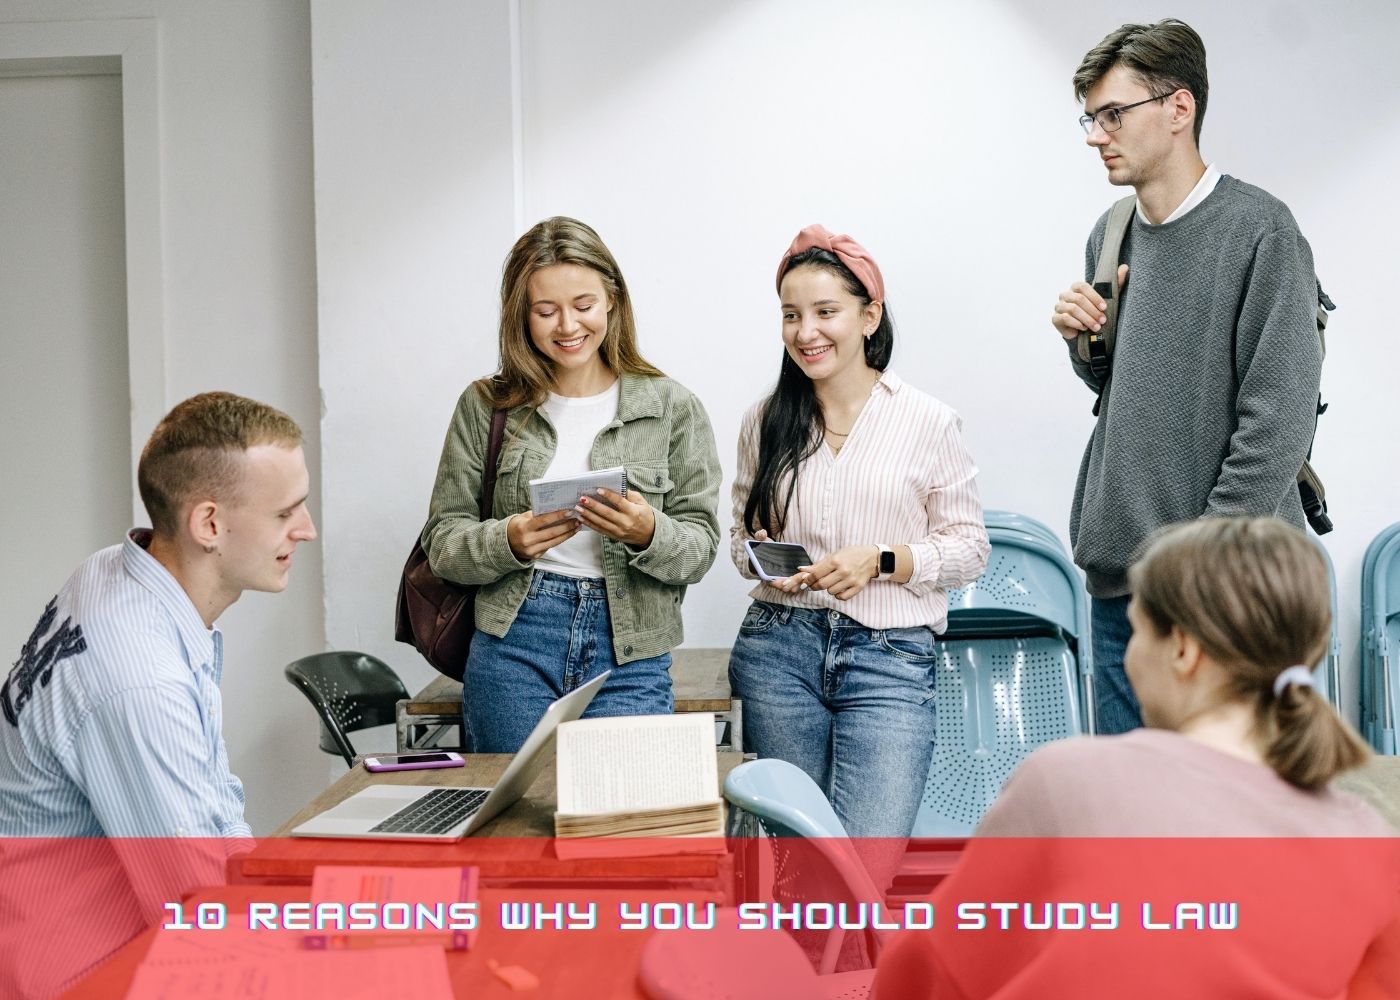 10 Reasons Why You Should Study Law